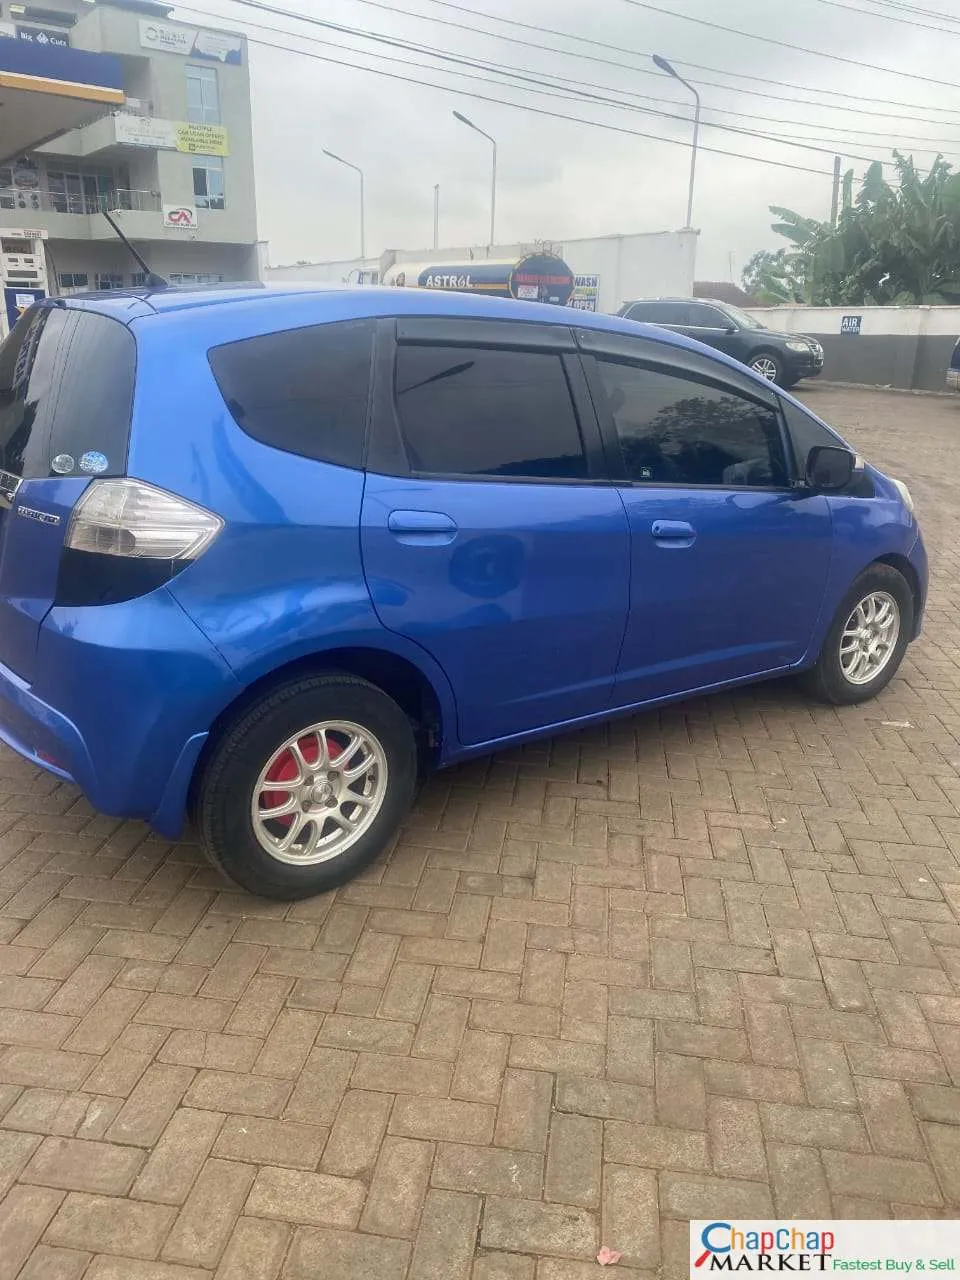 Cars Cars For Sale-Honda fit hybrid for sale in Kenya You Pay 30% Deposit Trade in OK hire purchase installments EXCLUSIVELY 🔥 7